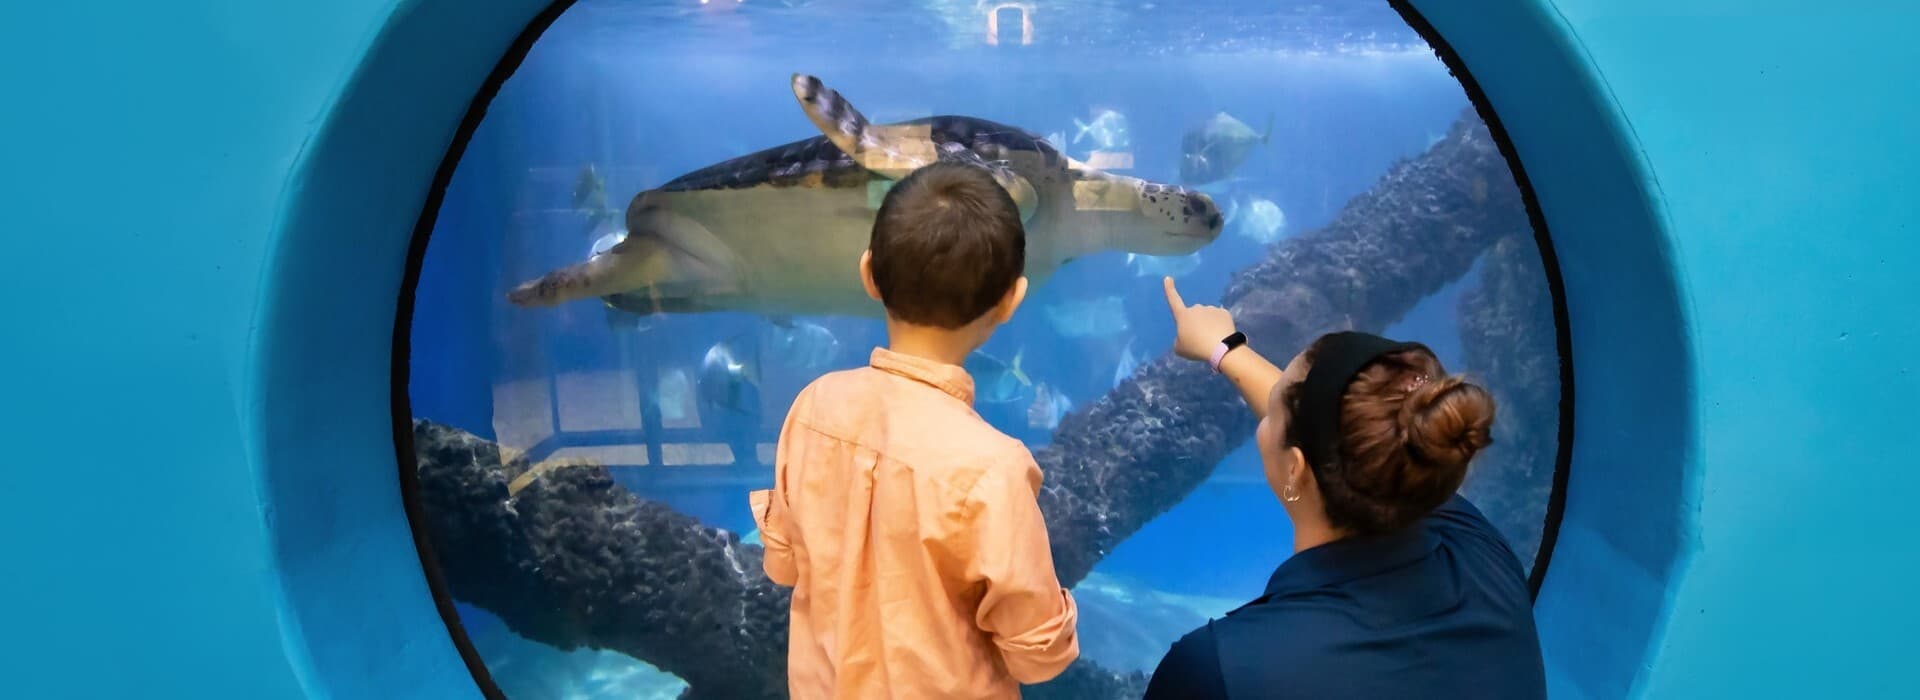 Educator with child guest viewing sea turtle exhibit